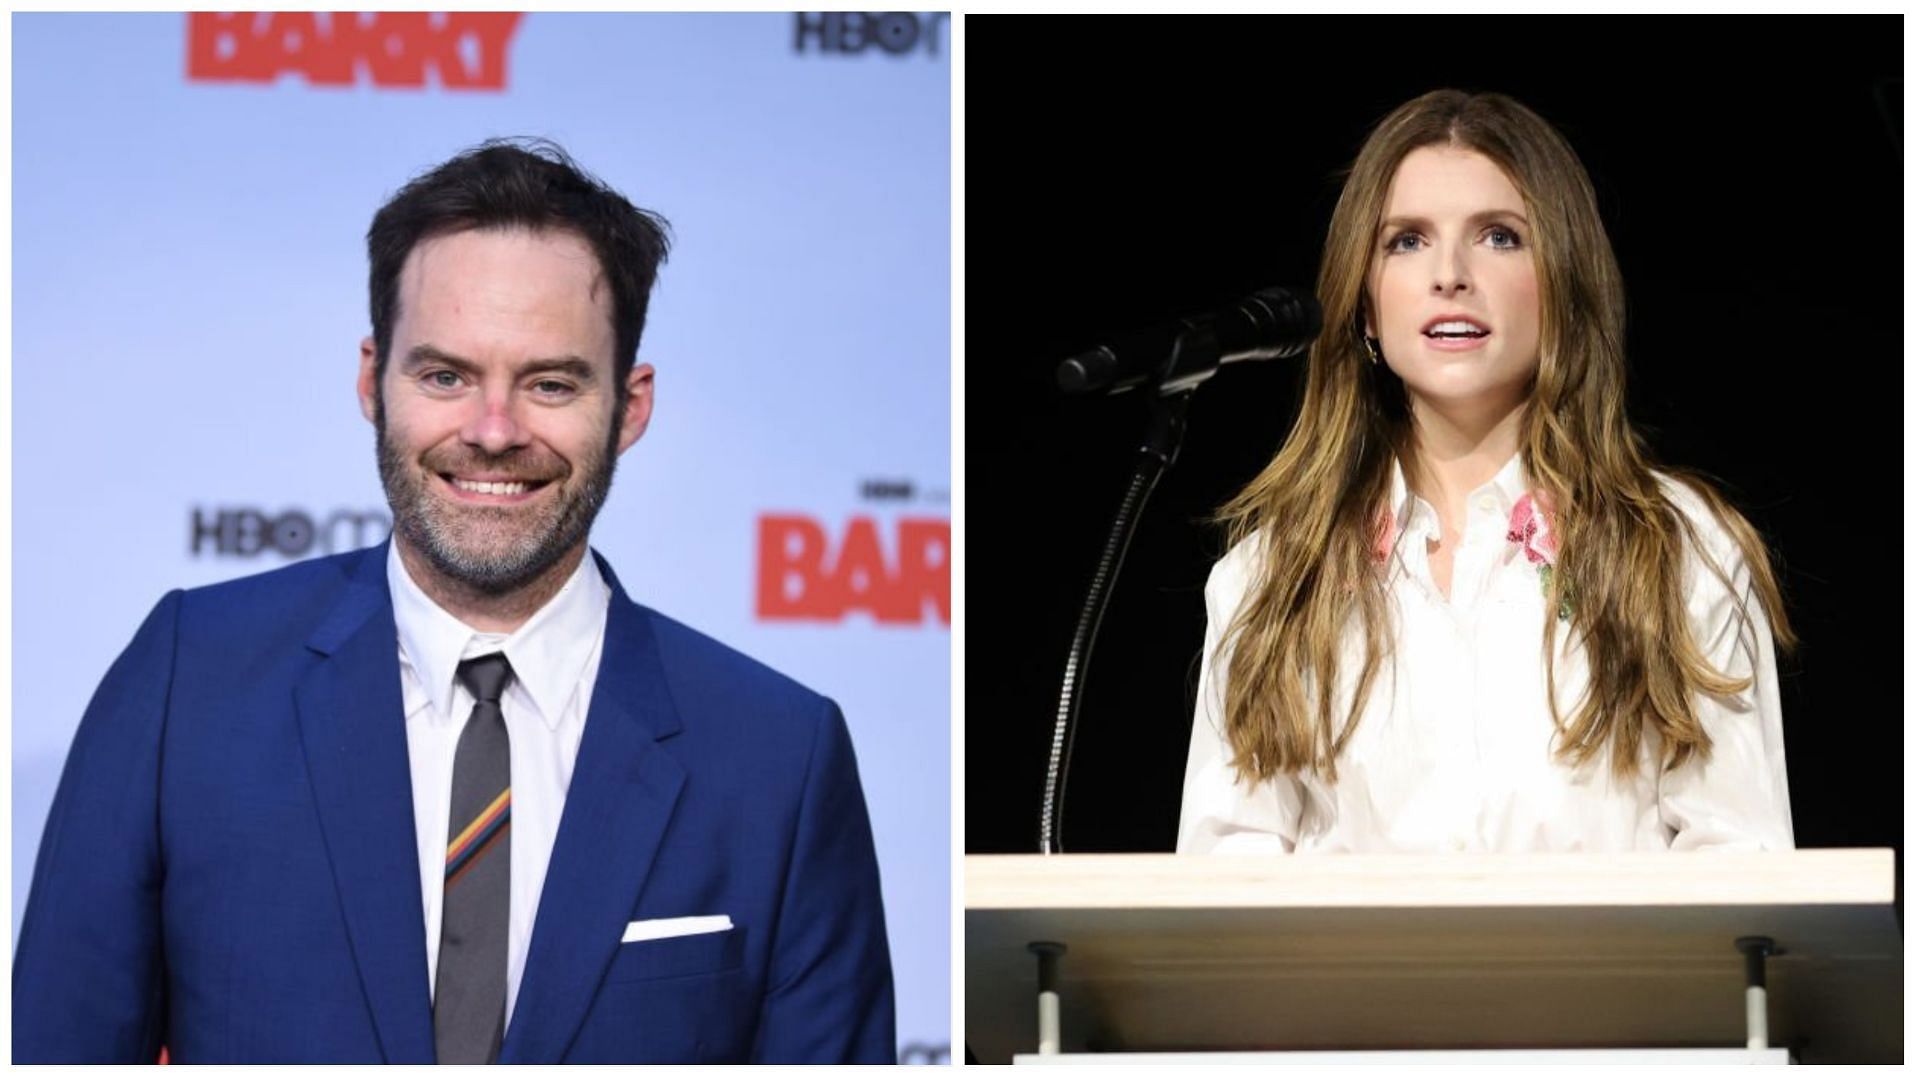 Bill Hader and Anna Kendrick are no longer together (Images via Araya Doheny and Rich Fury/Getty Images)